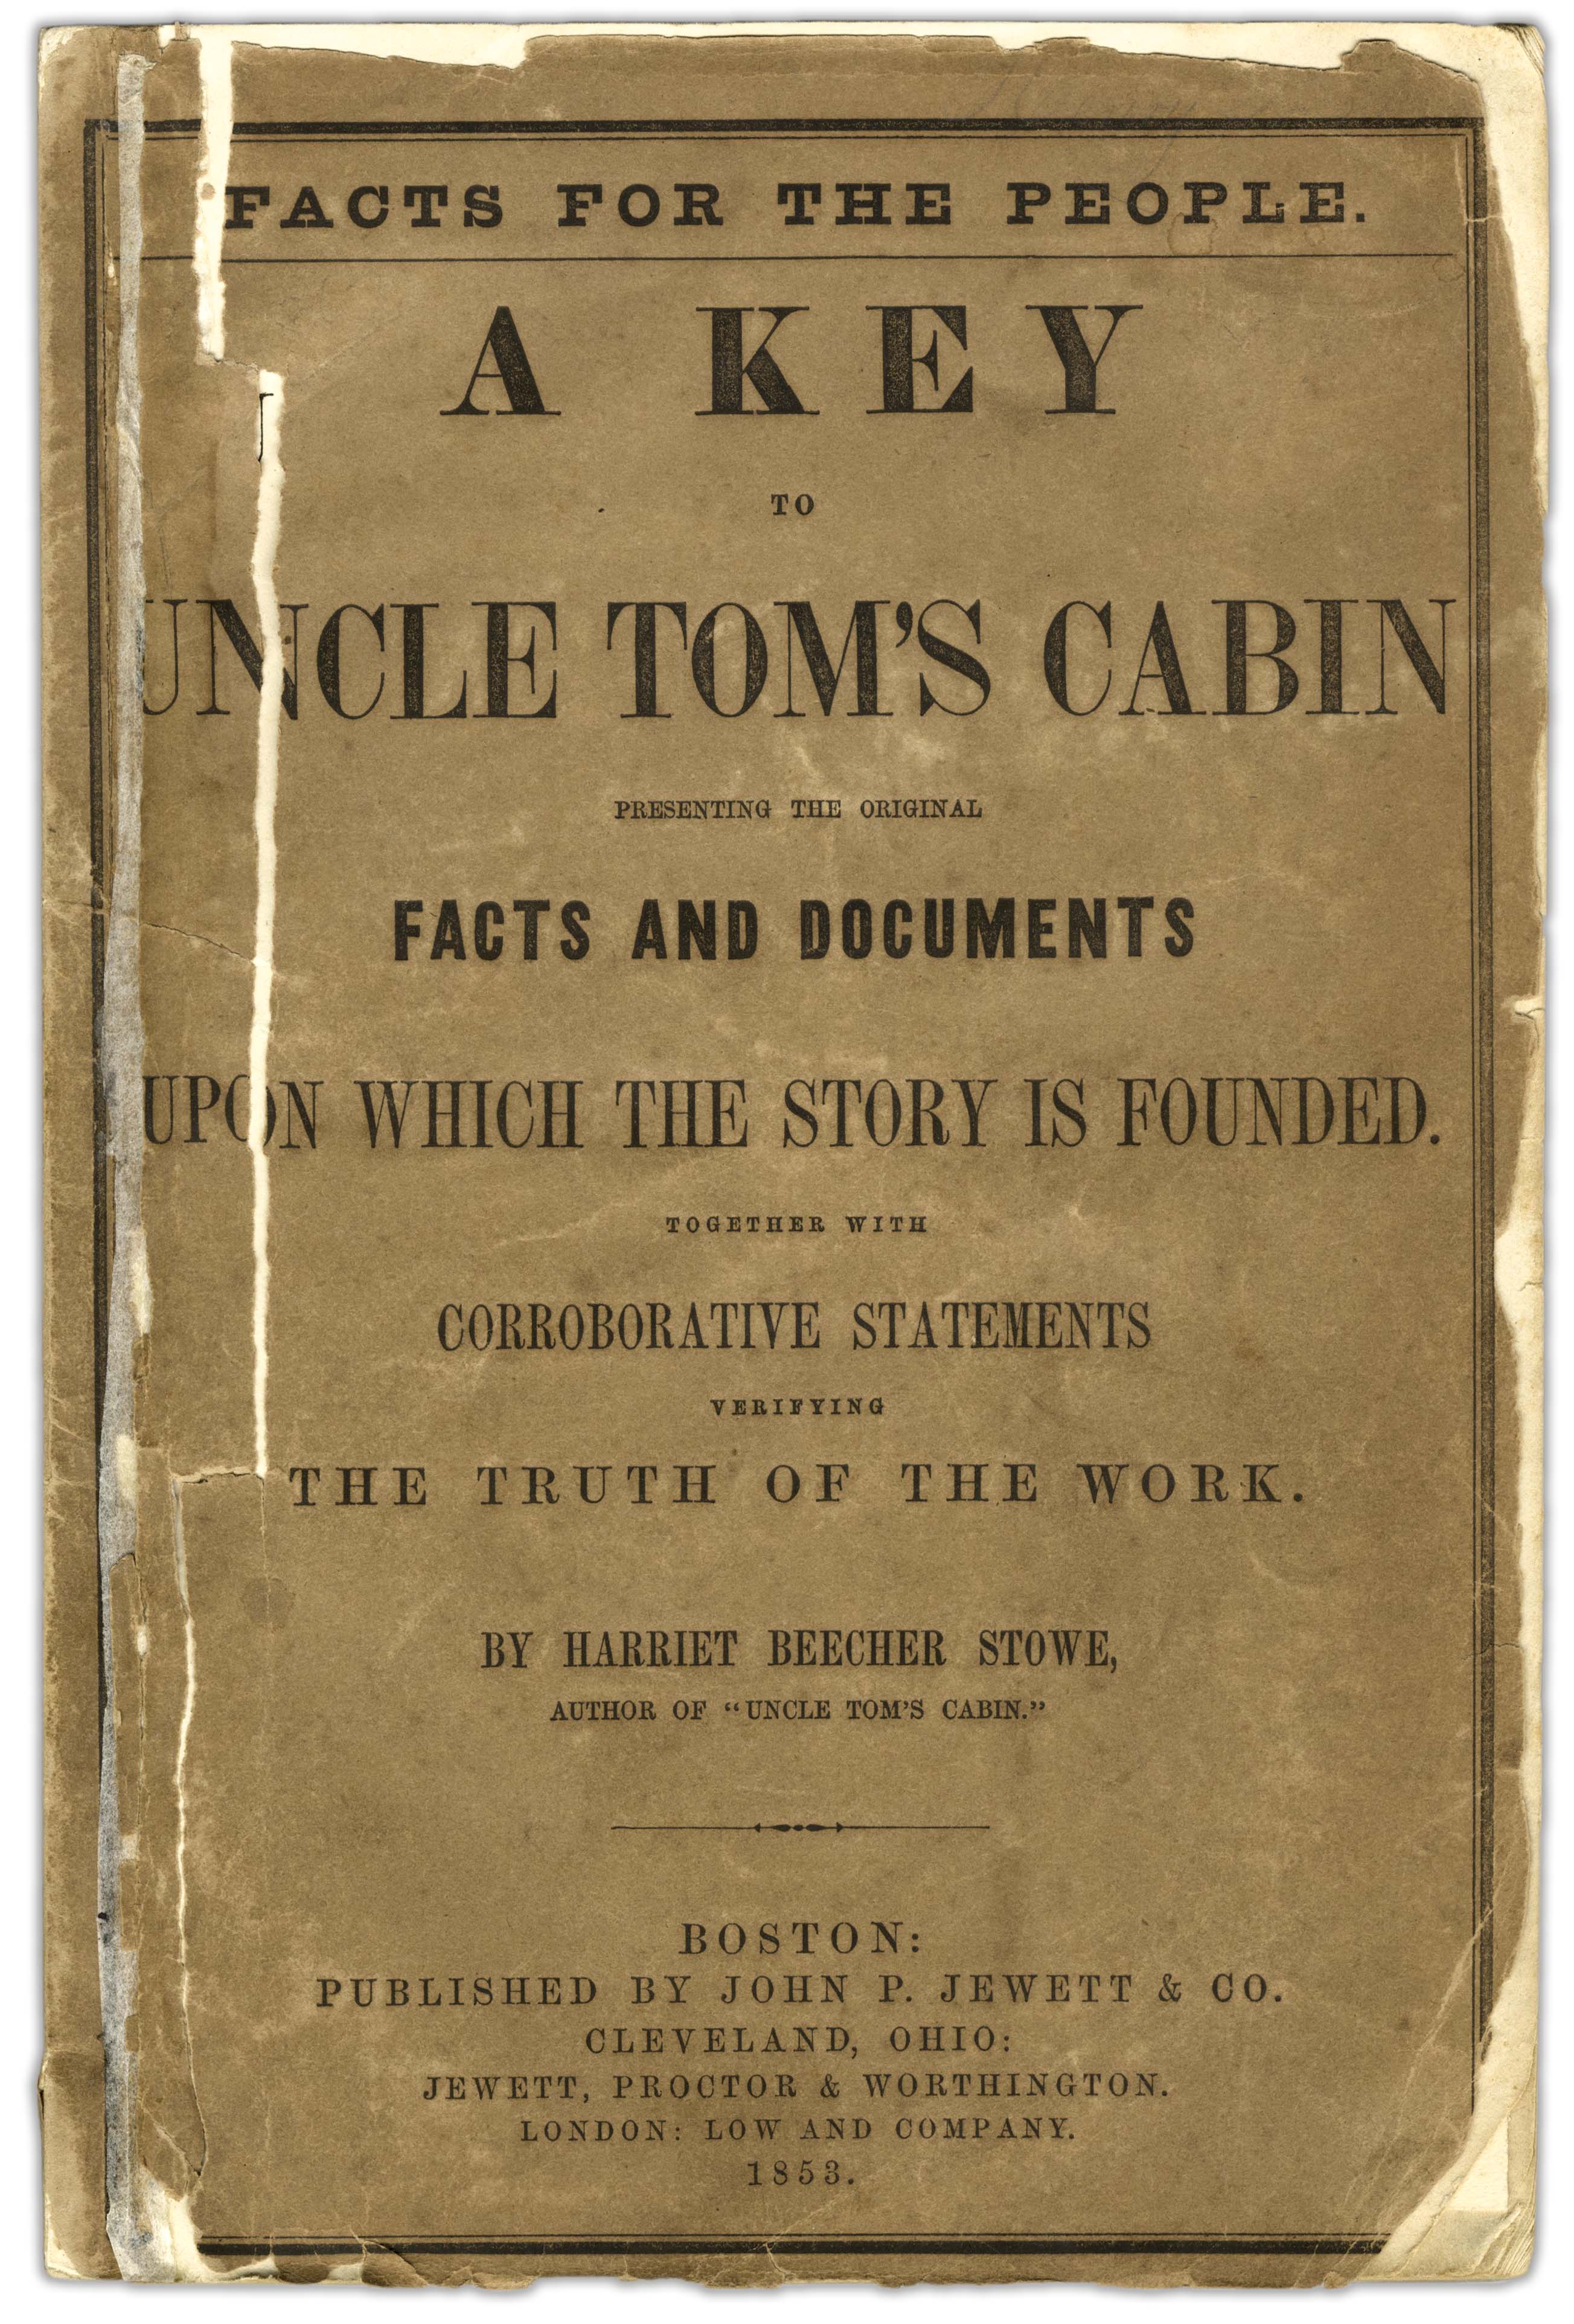 thesis statement for uncle tom's cabin